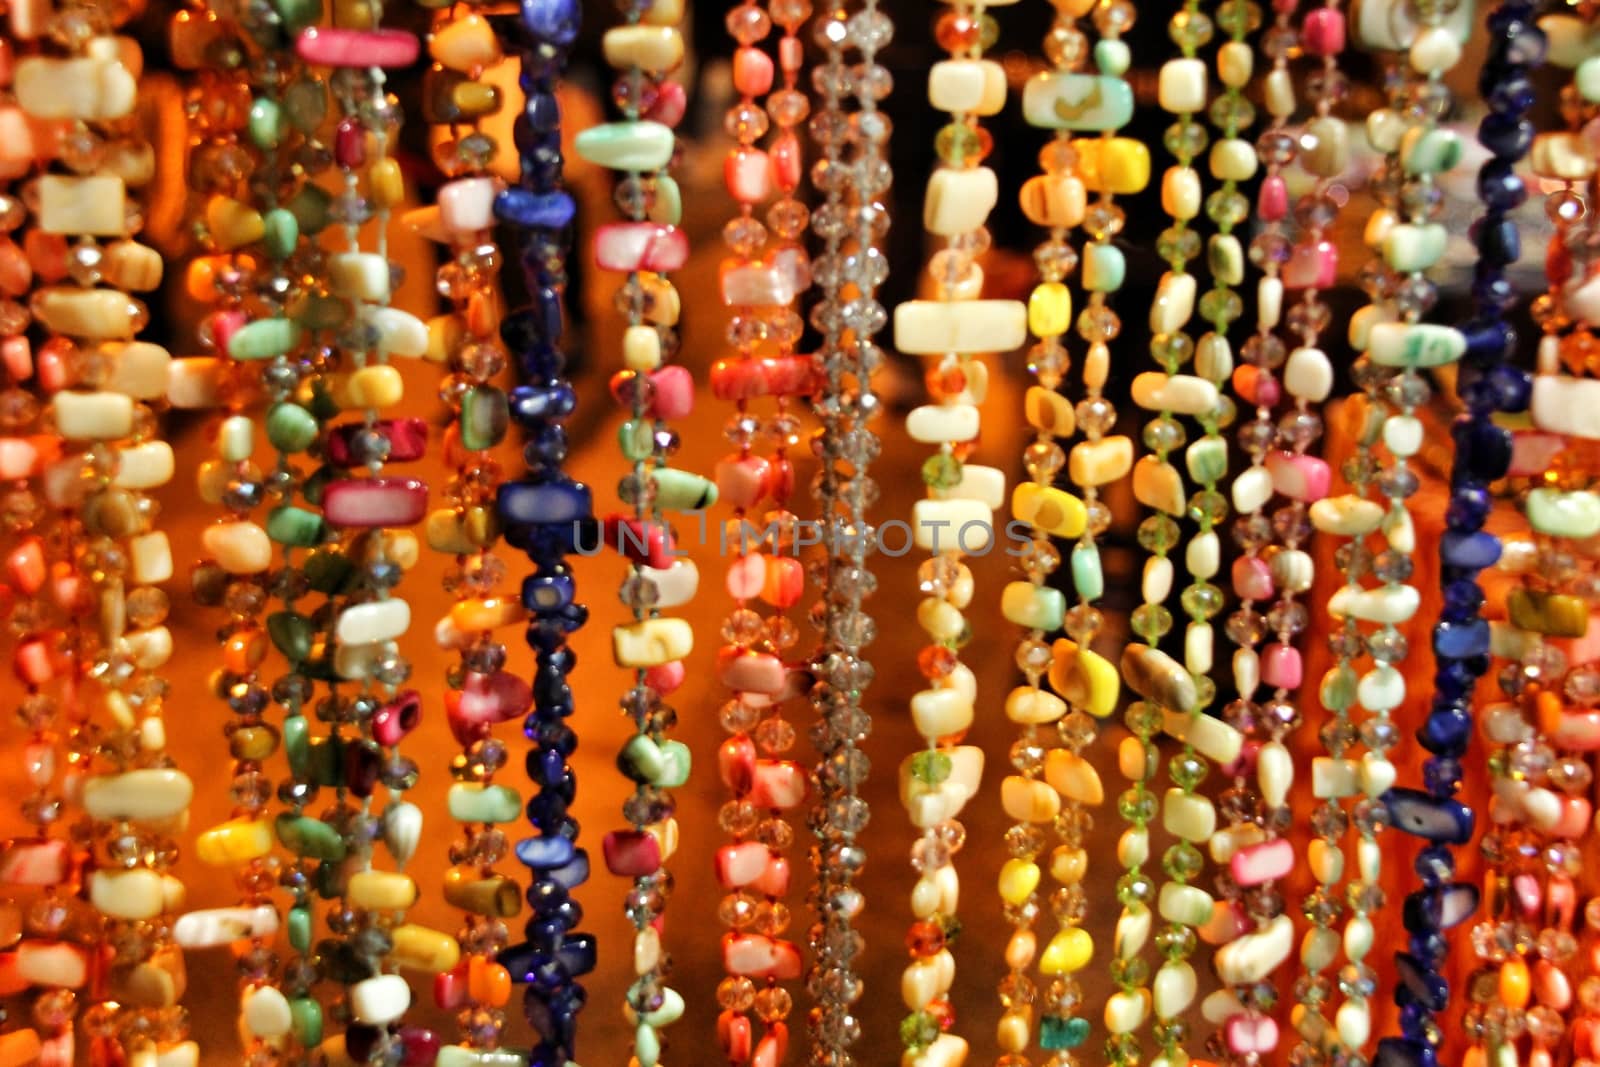 Colorful rhinestones necklaces hanging in a street stall by soniabonet